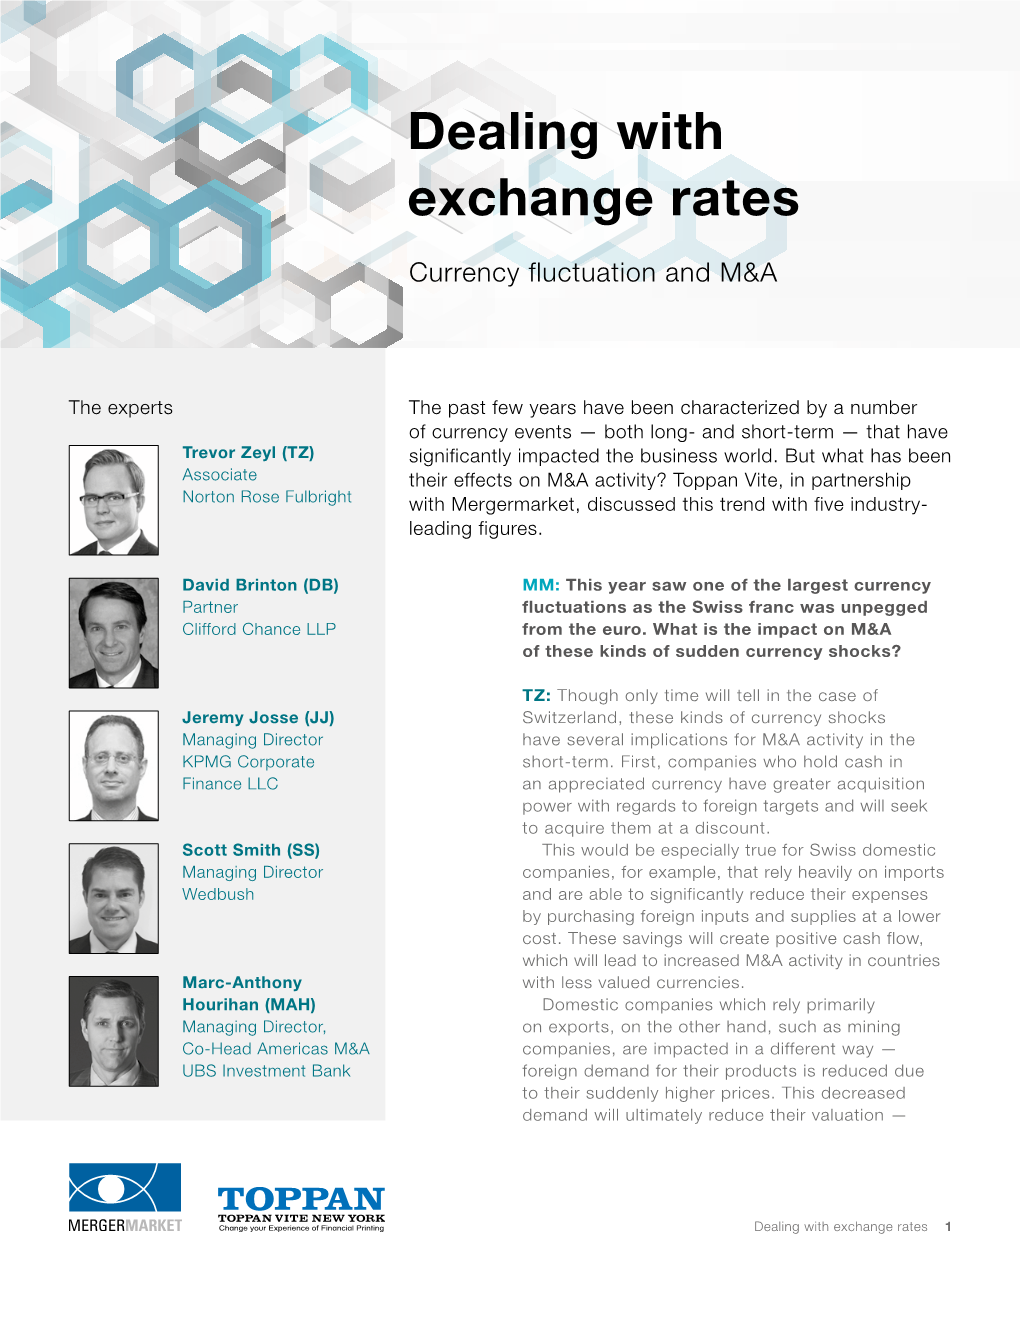 Dealing with Exchange Rates